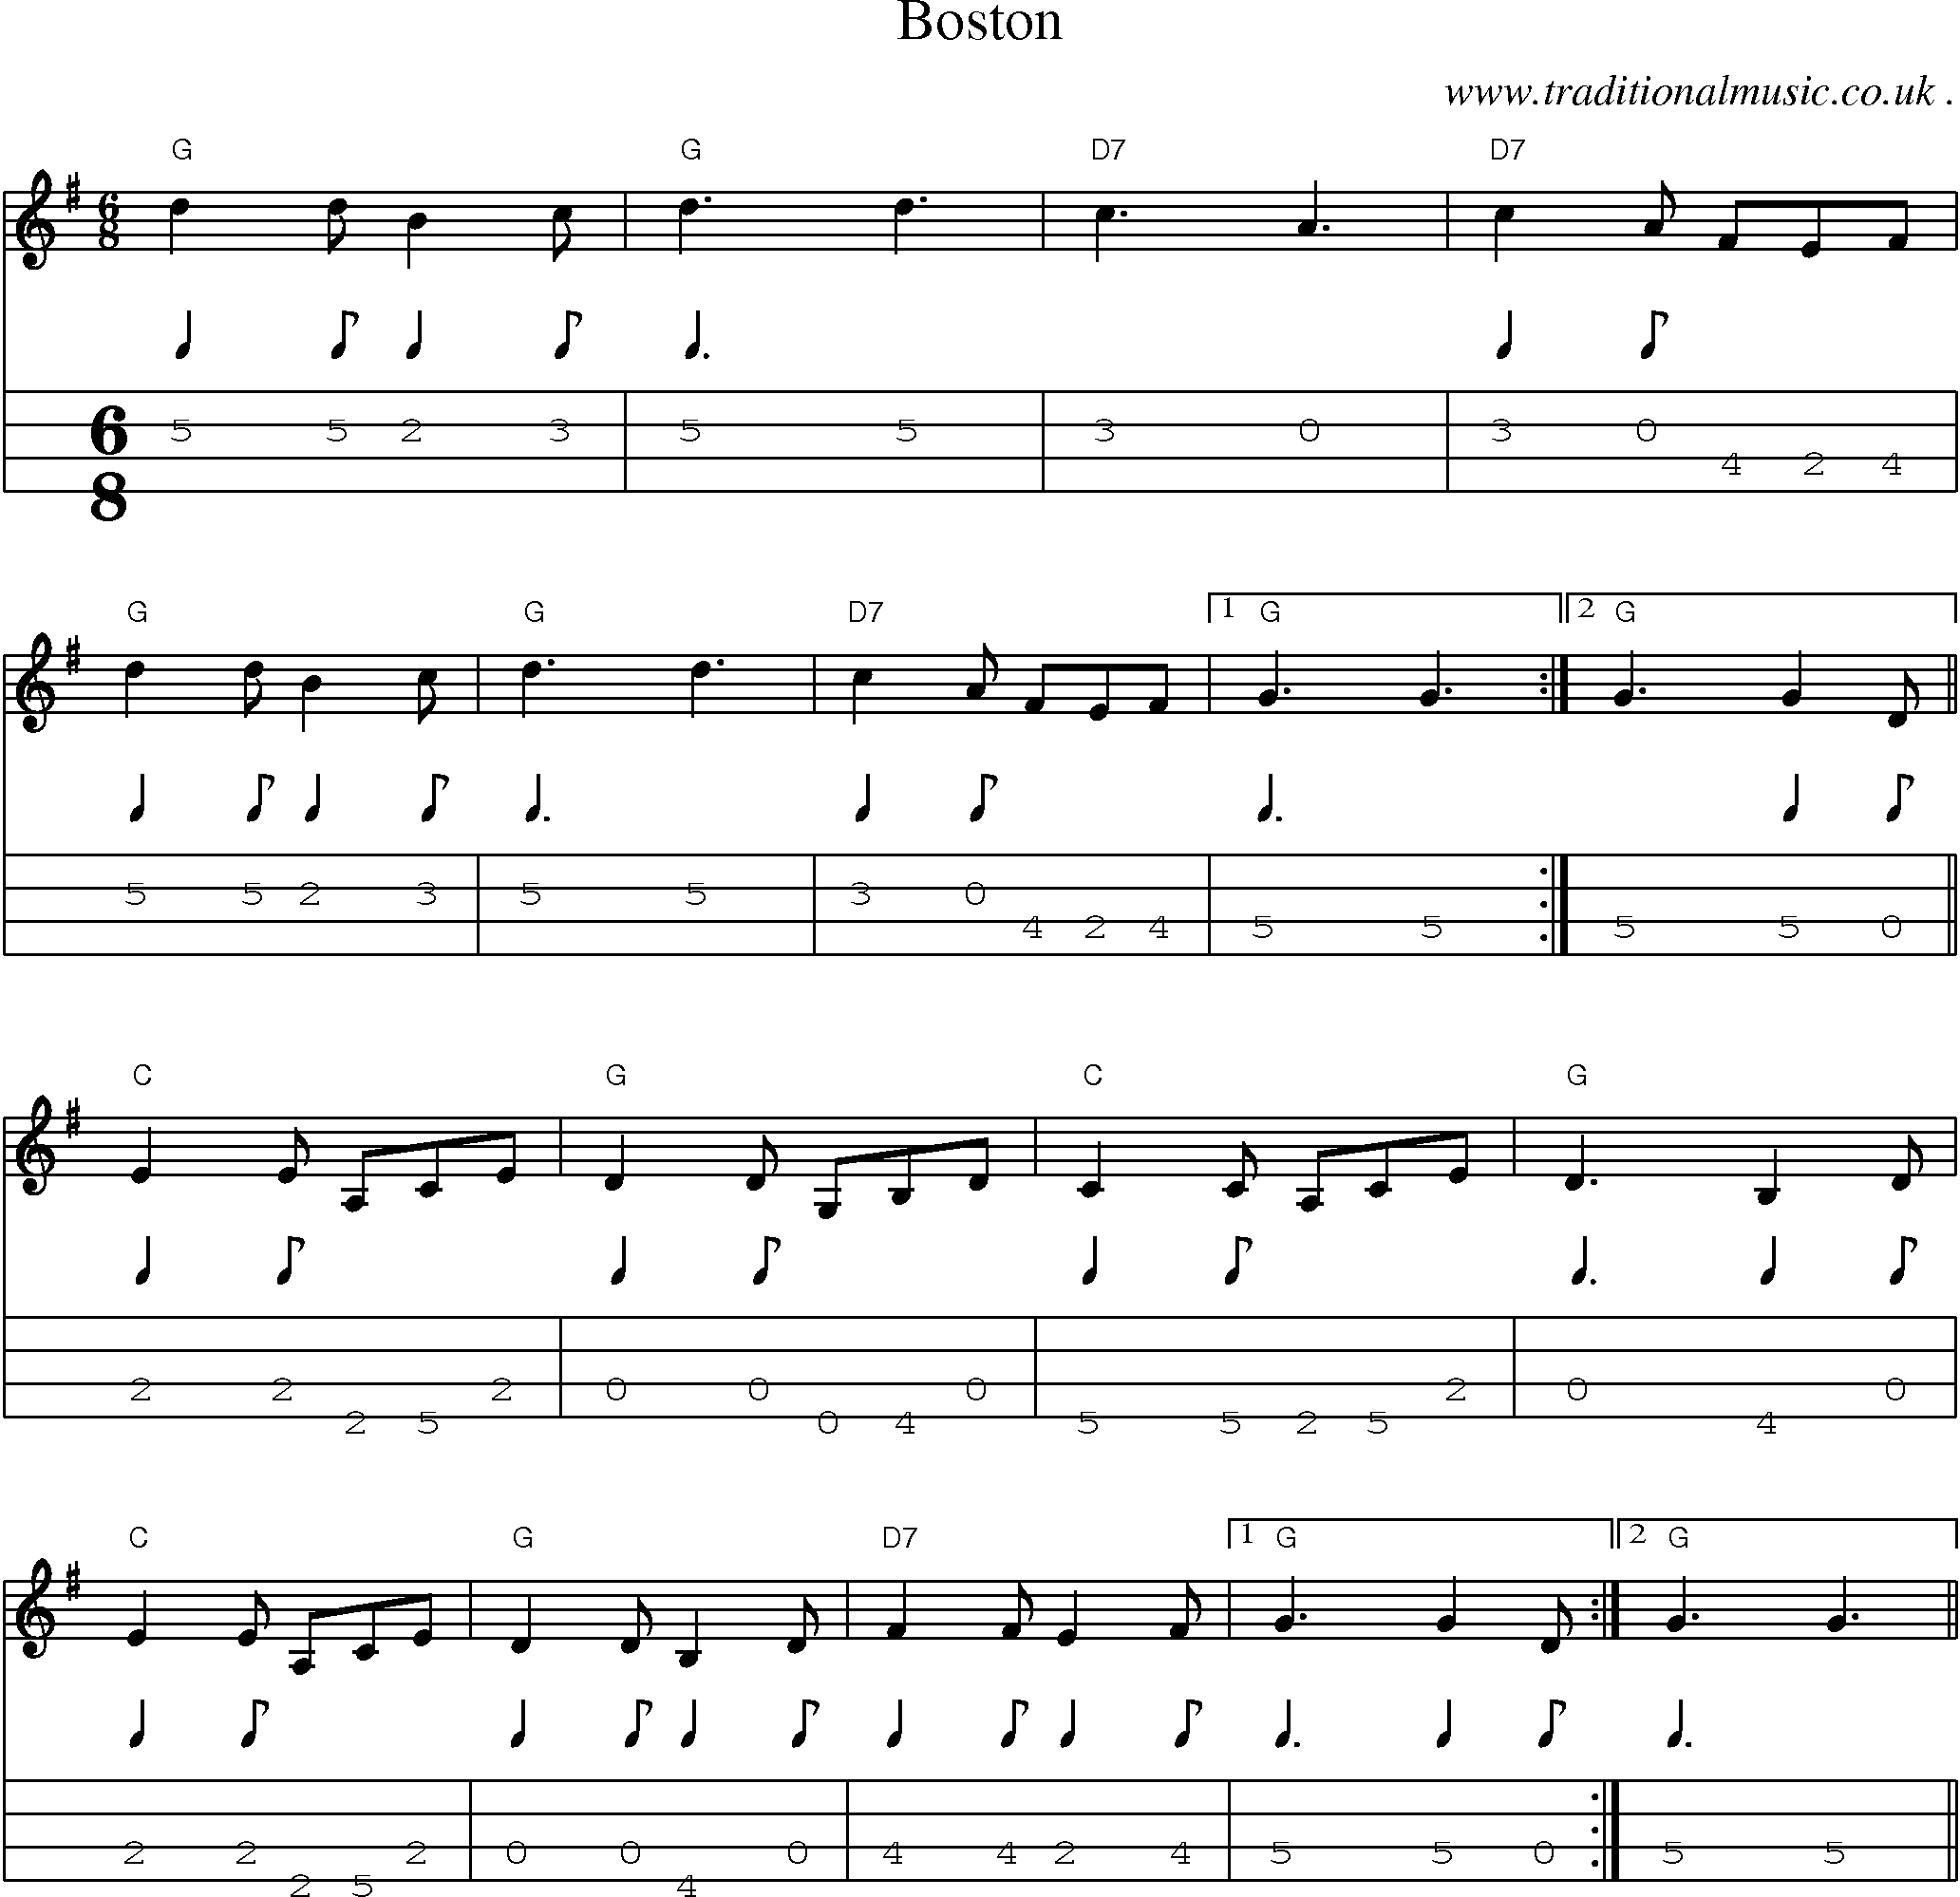 Music Score and Guitar Tabs for Boston